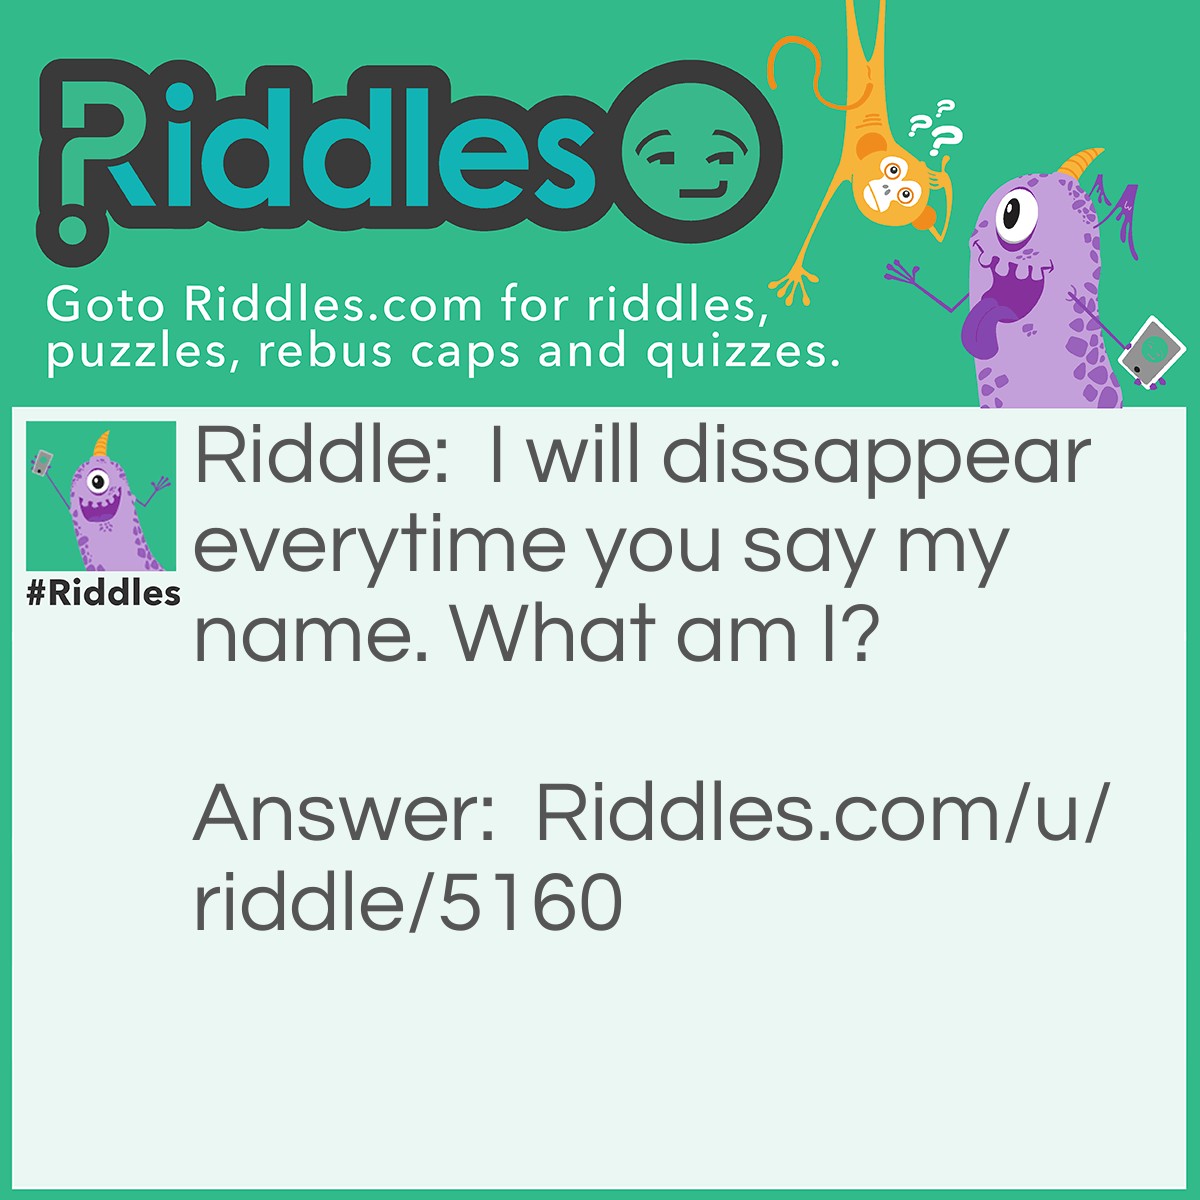 Riddle: I will dissappear everytime you say my name. What am I? Answer: Silence.